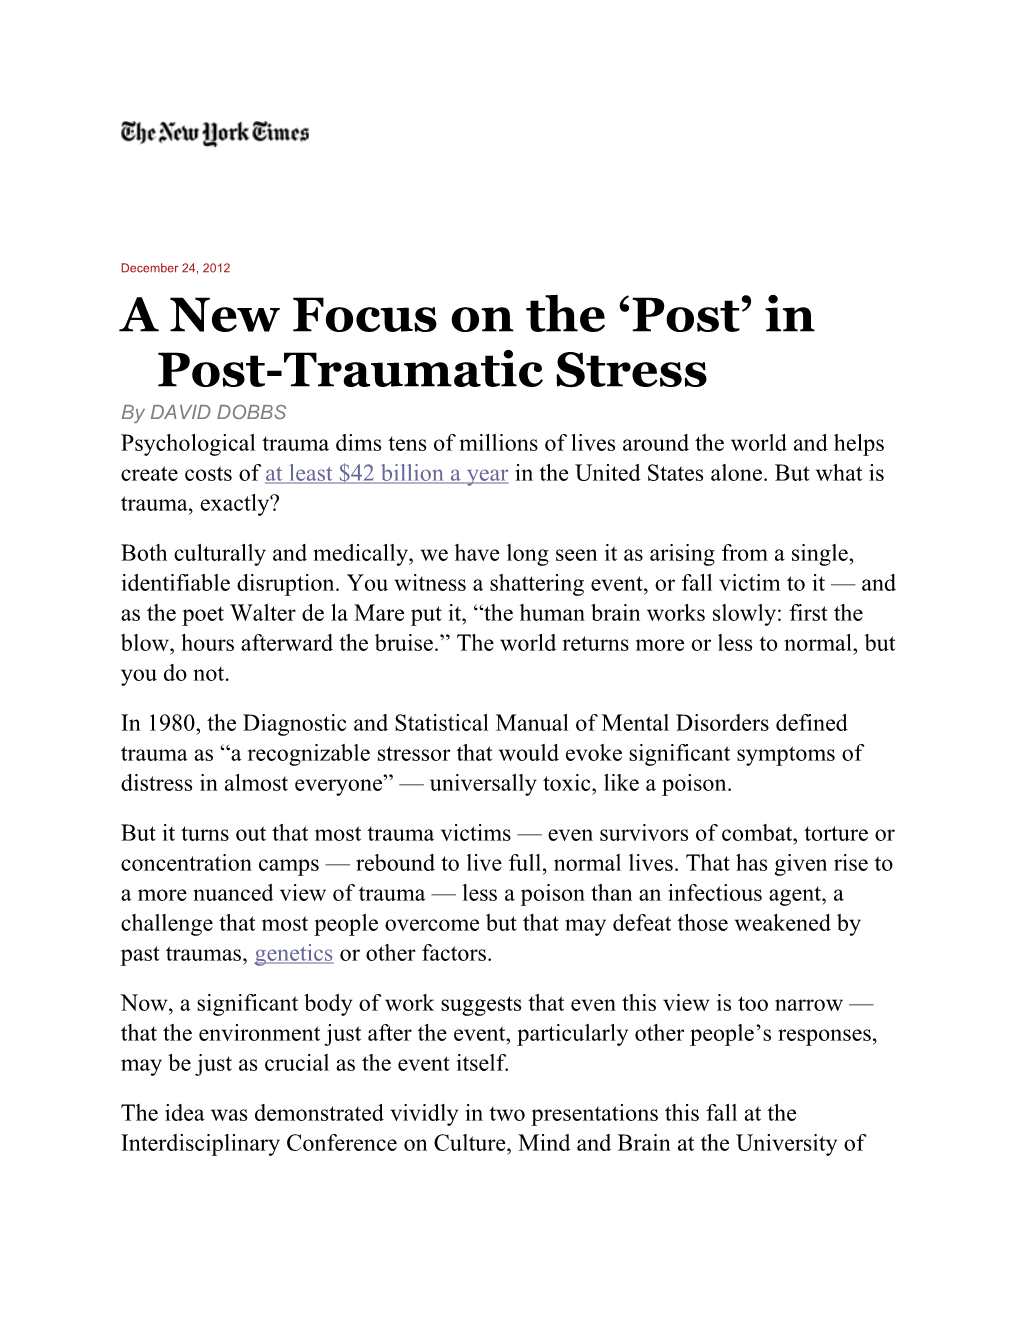 A New Focus on the Post in Post-Traumatic Stress